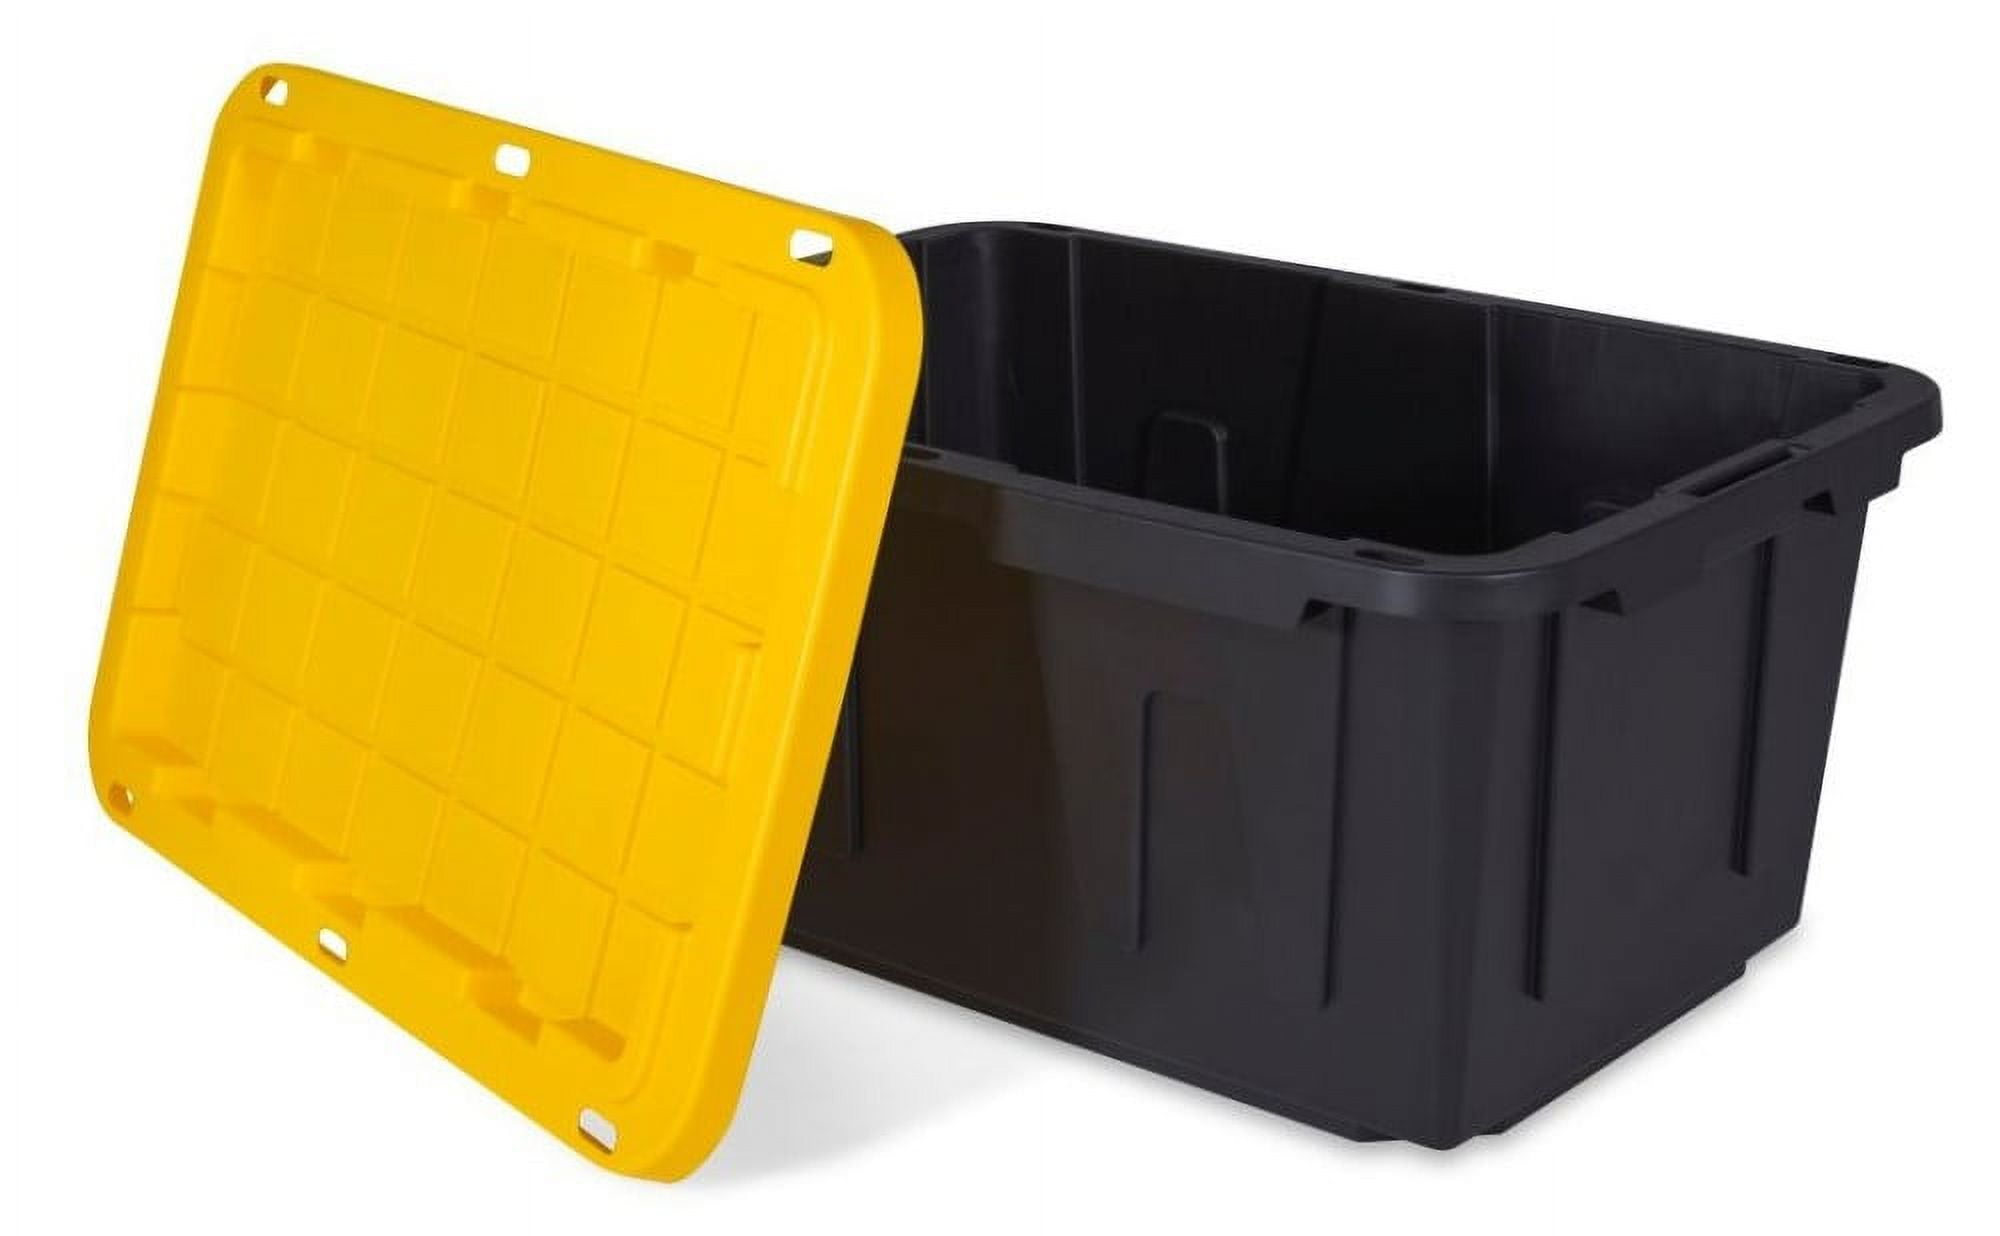 Project Source 2-Pack Project Source Commander Large 27-Gallons (108-Quart)  Black and Yellow Heavy Duty Tote with snap lid